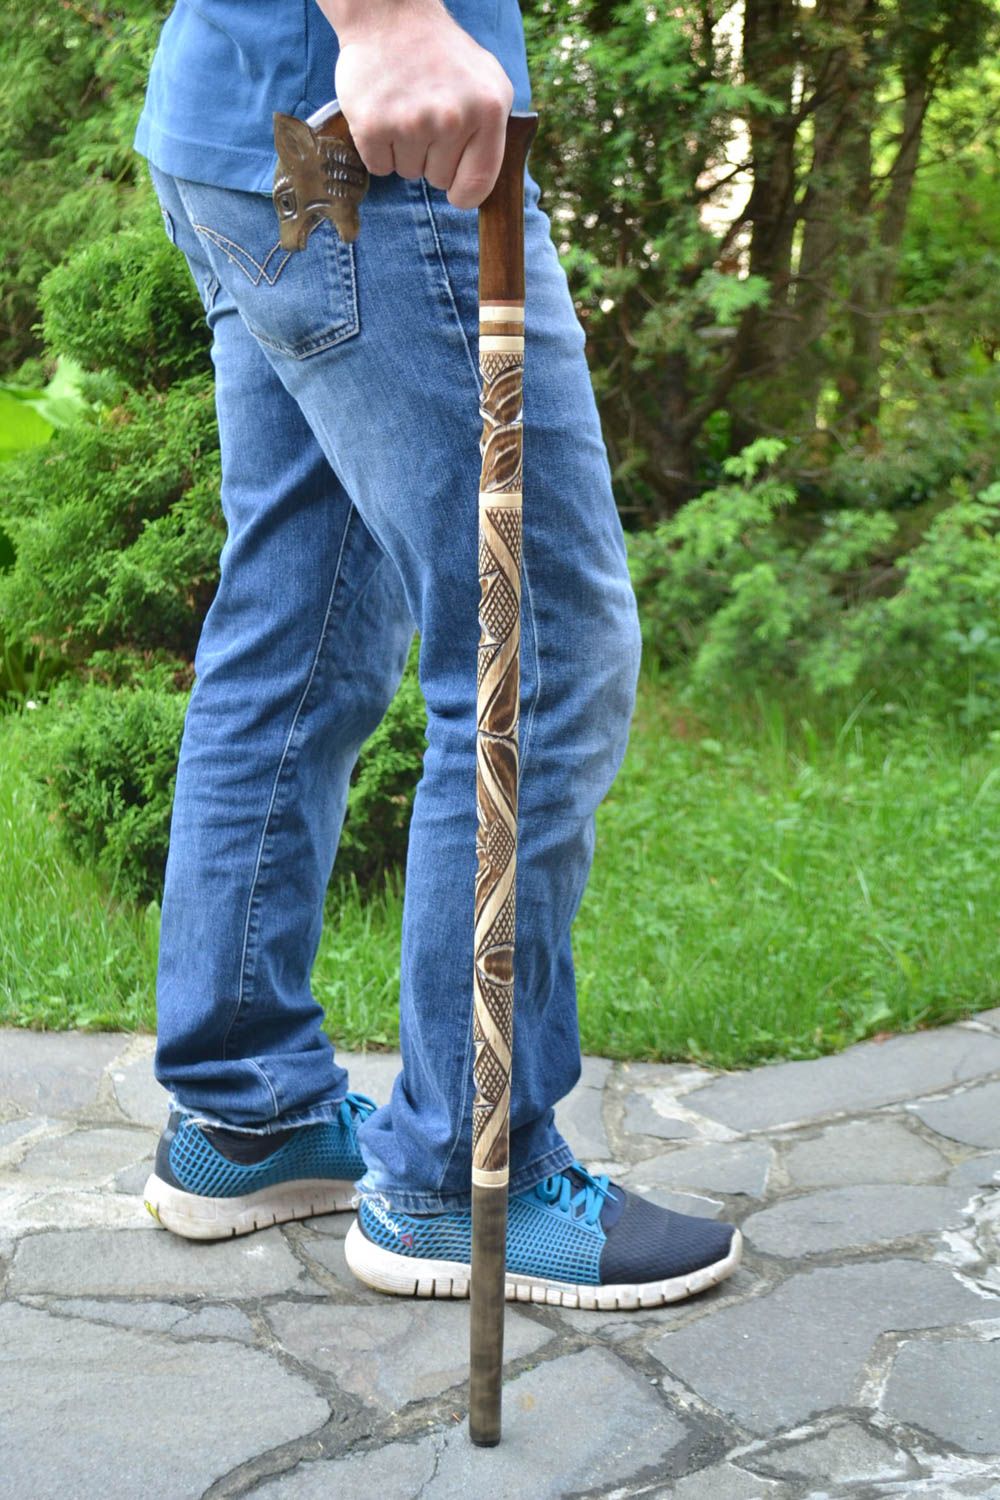 Handmade art carved decorative wooden walking stick with animal head handle photo 1